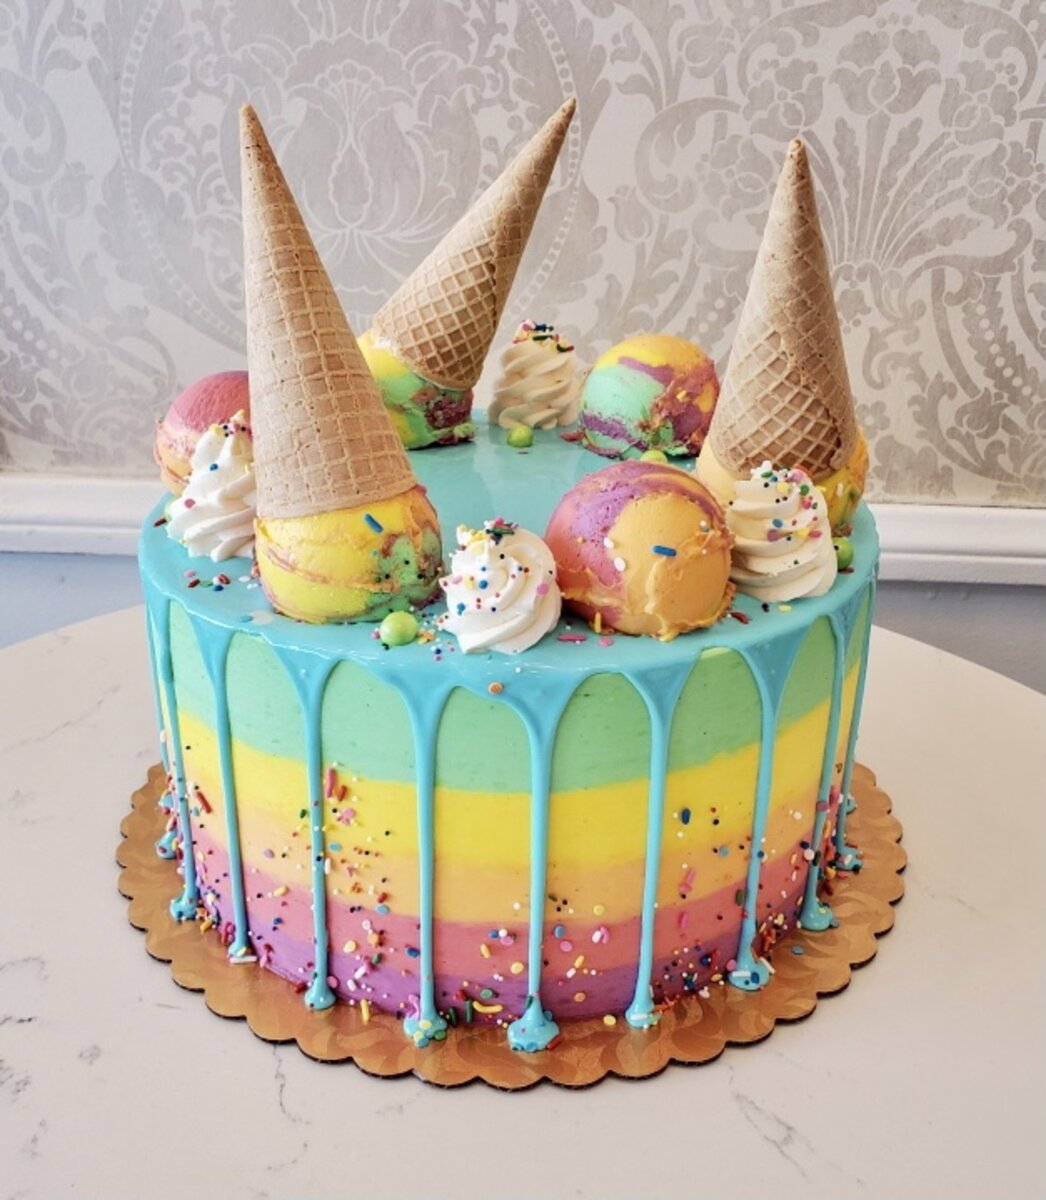 Watch This Glitter Ice Cream Cone Cake — Be Mesmerized Forever